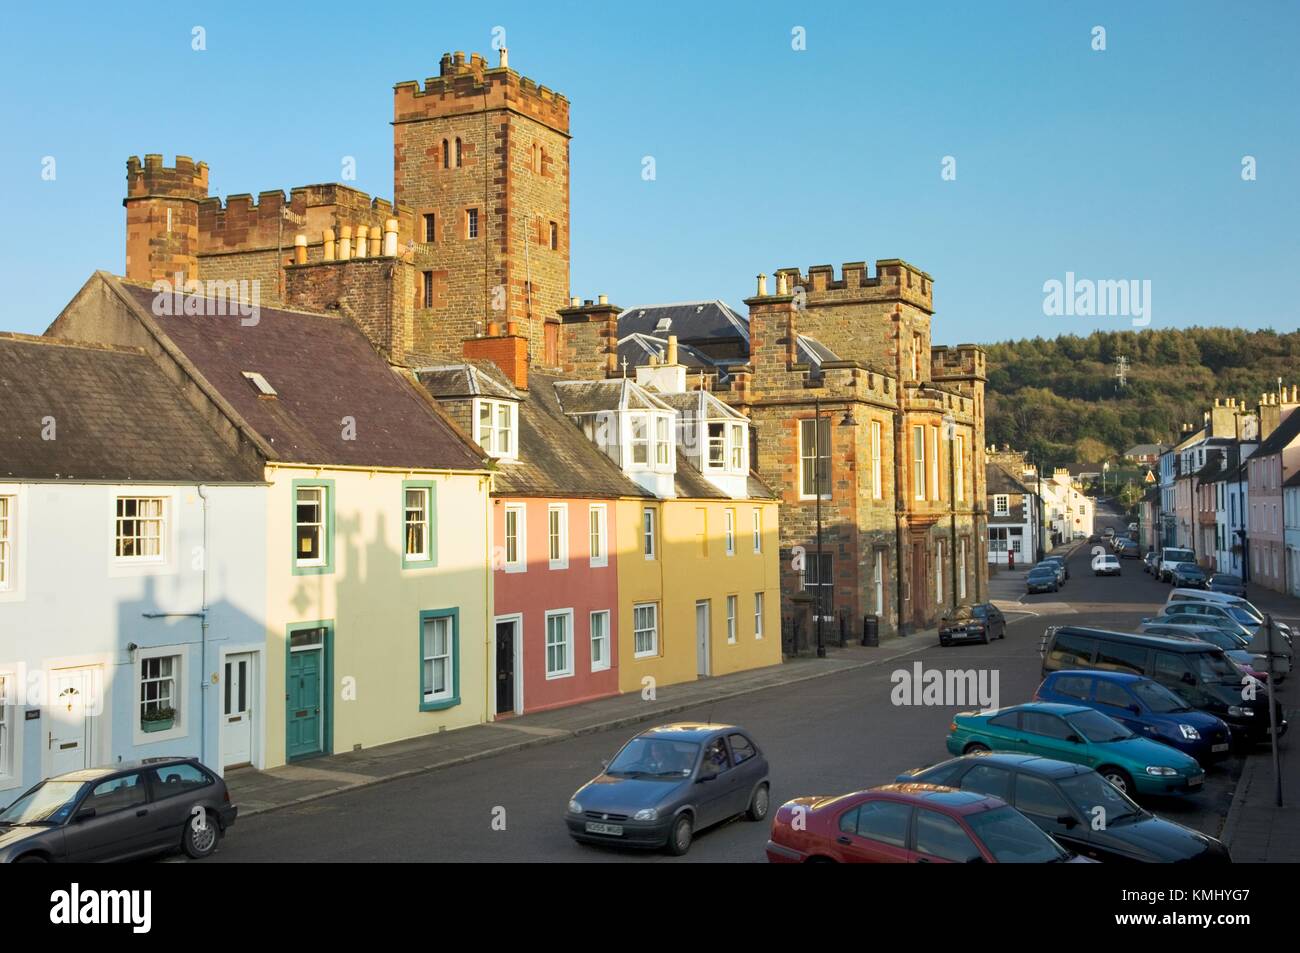 The High Street and Old Jail in the ancient town of Kirkcudbright, Dumfries and Galloway Region, Scotland Stock Photo